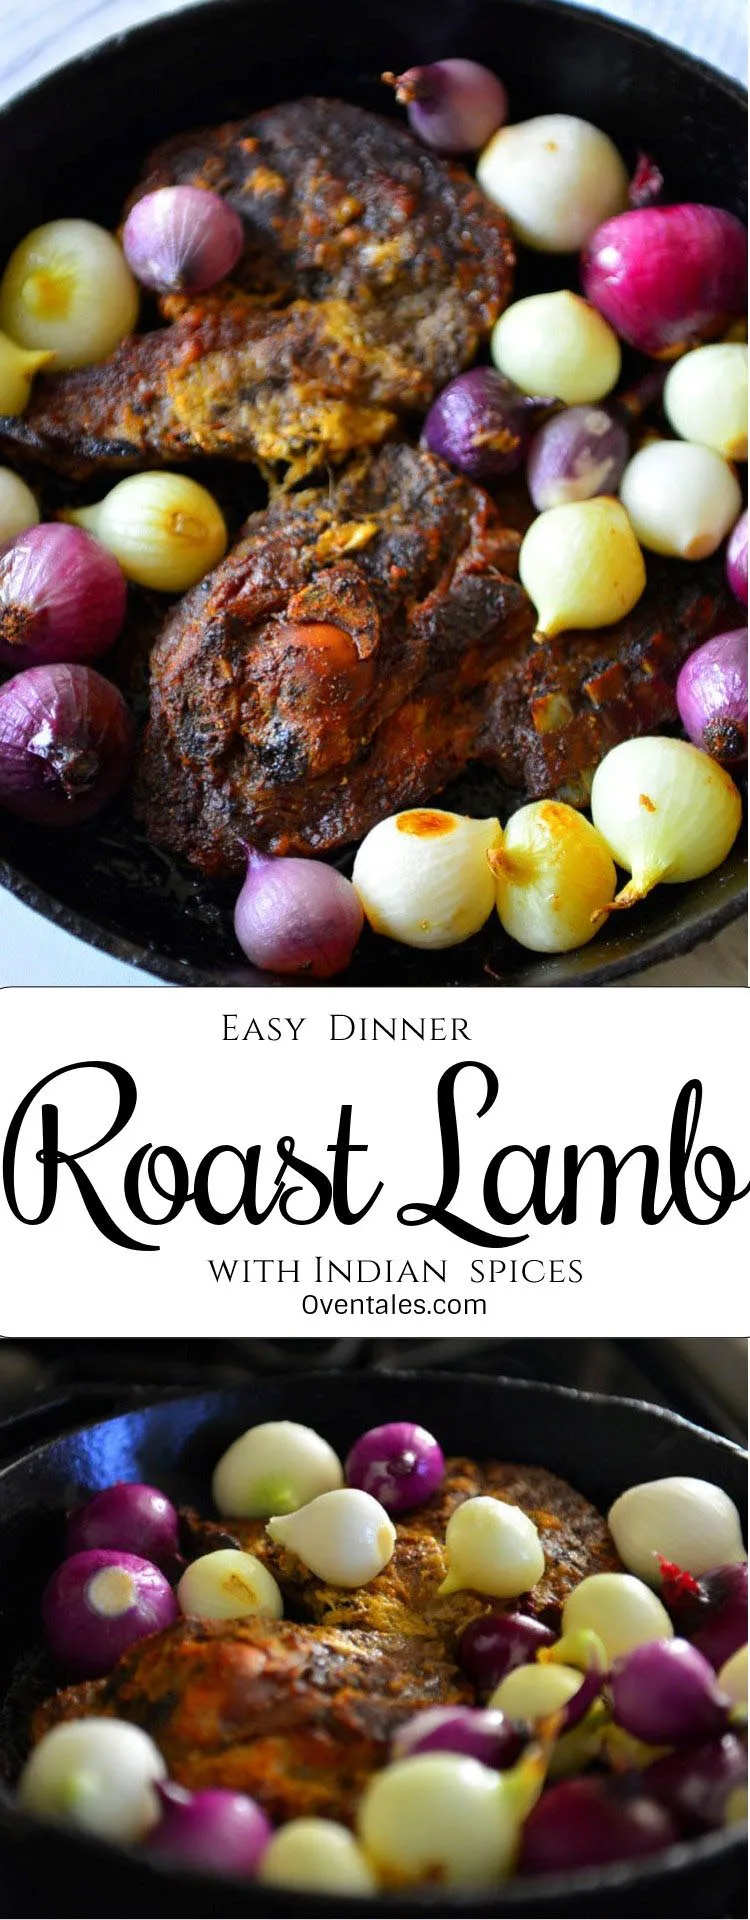 Roast lamb With Indian Spices